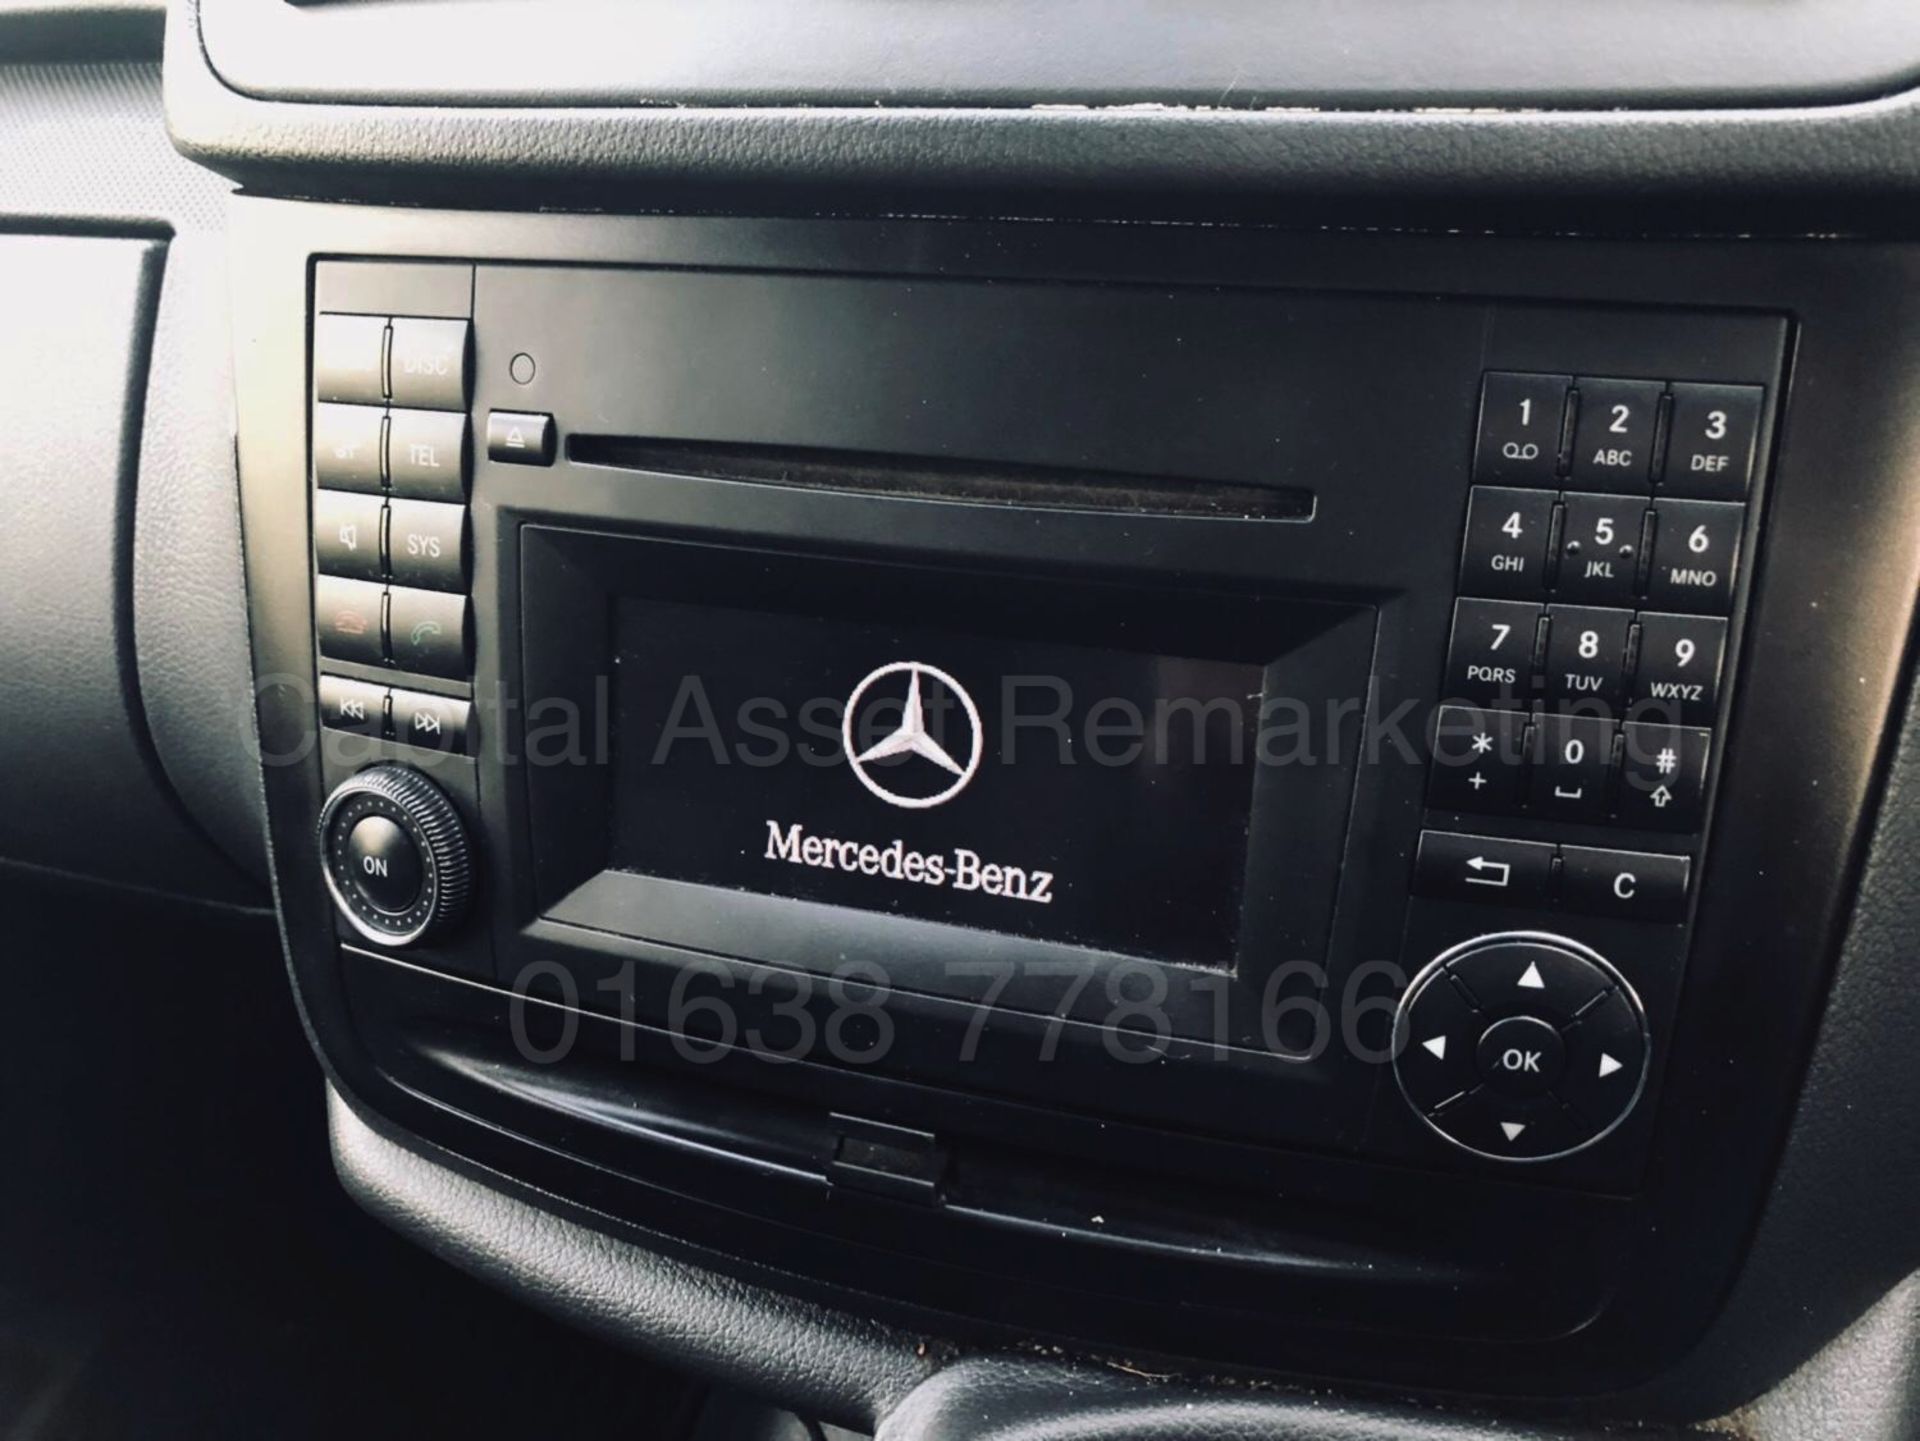 MERCEDES VITO 113CDI LWB (2015 MODEL - NEW SHAPE) 1 OWNER - LOW MILES - ELEC PACK - 130BHP - 6 SPEED - Image 24 of 30